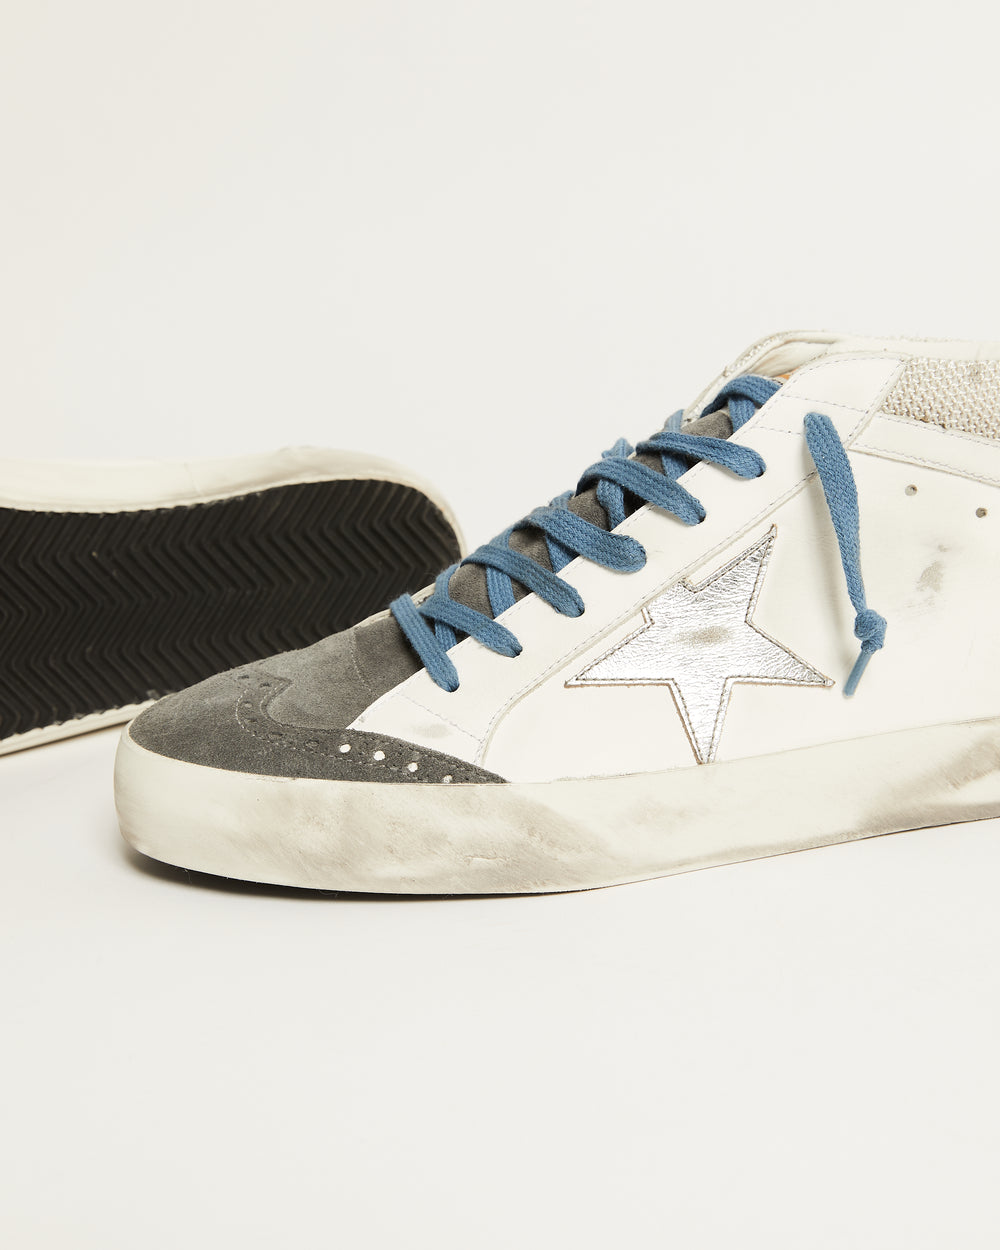 Mid Star Double Quarter in White Leather w/ Dark Grey Suede Toe and Silver Star